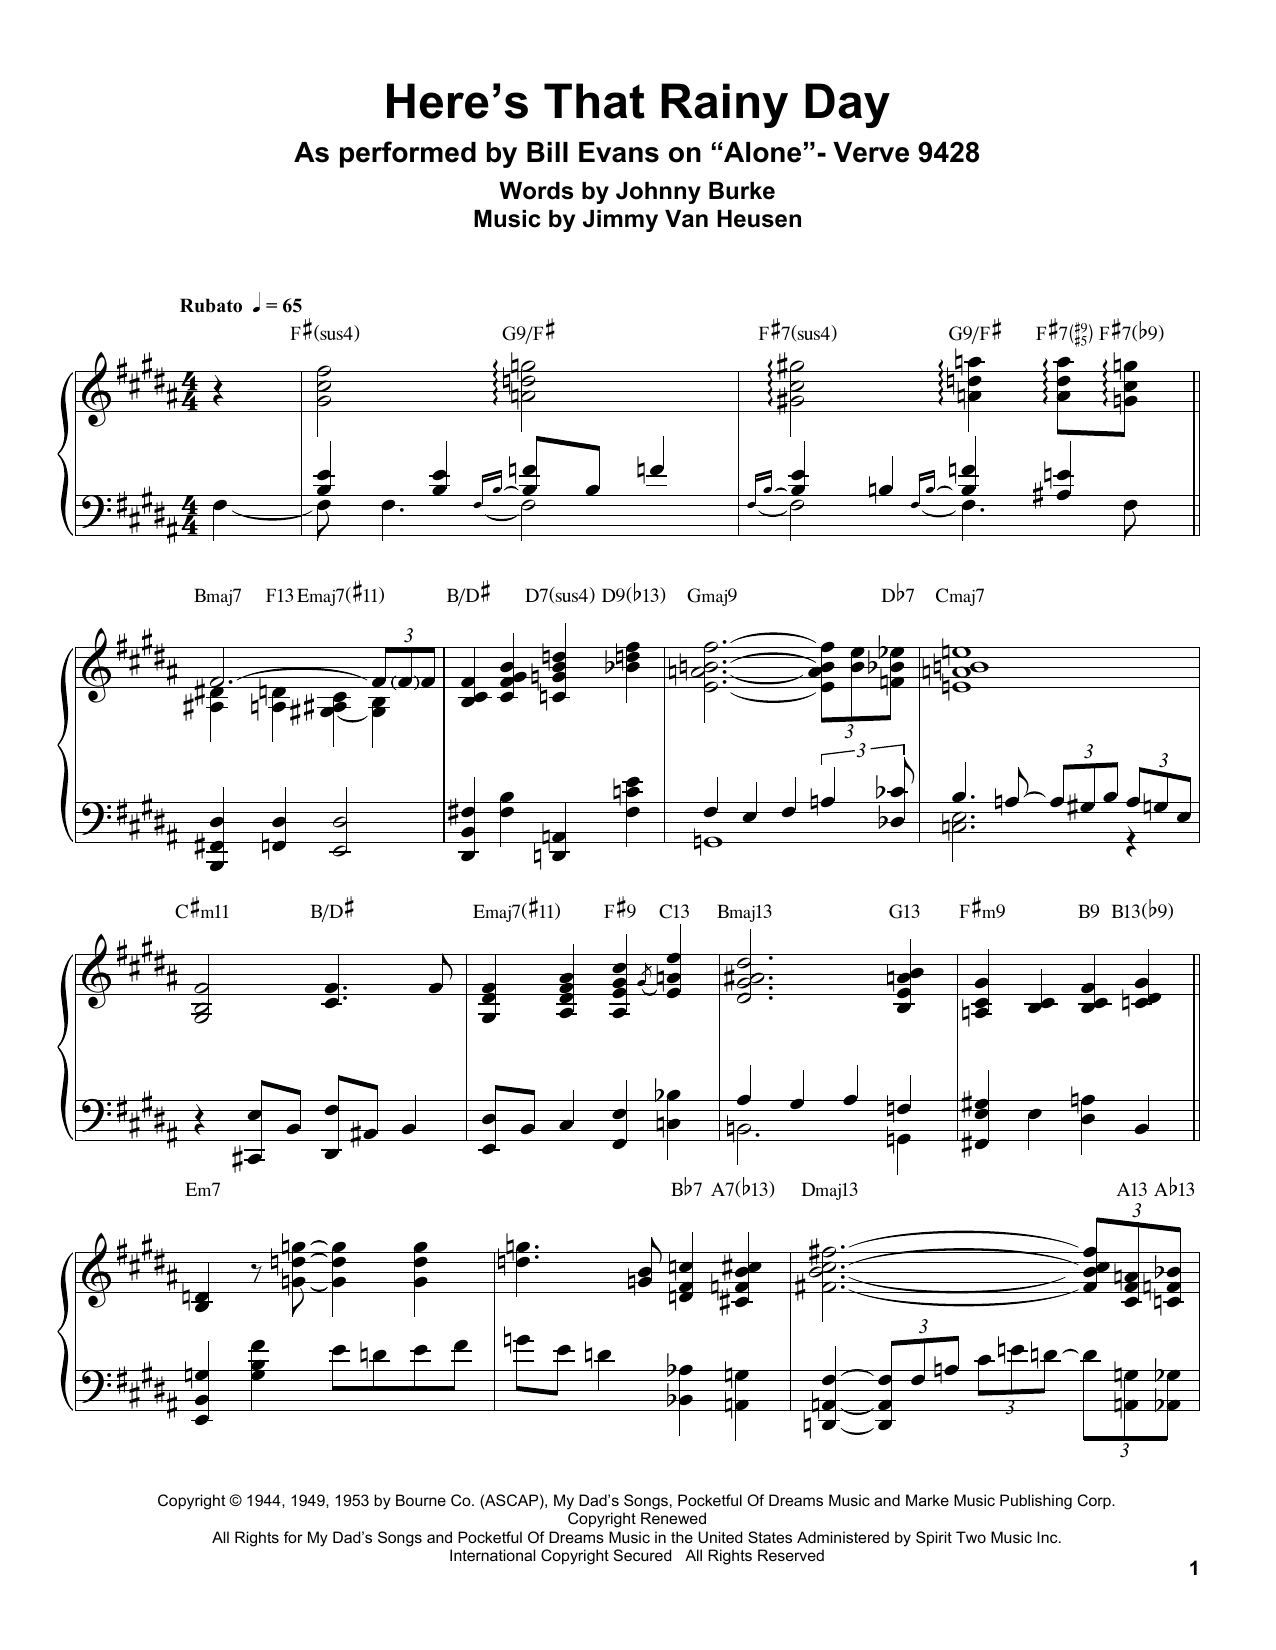 Download Bill Evans Here's That Rainy Day Sheet Music